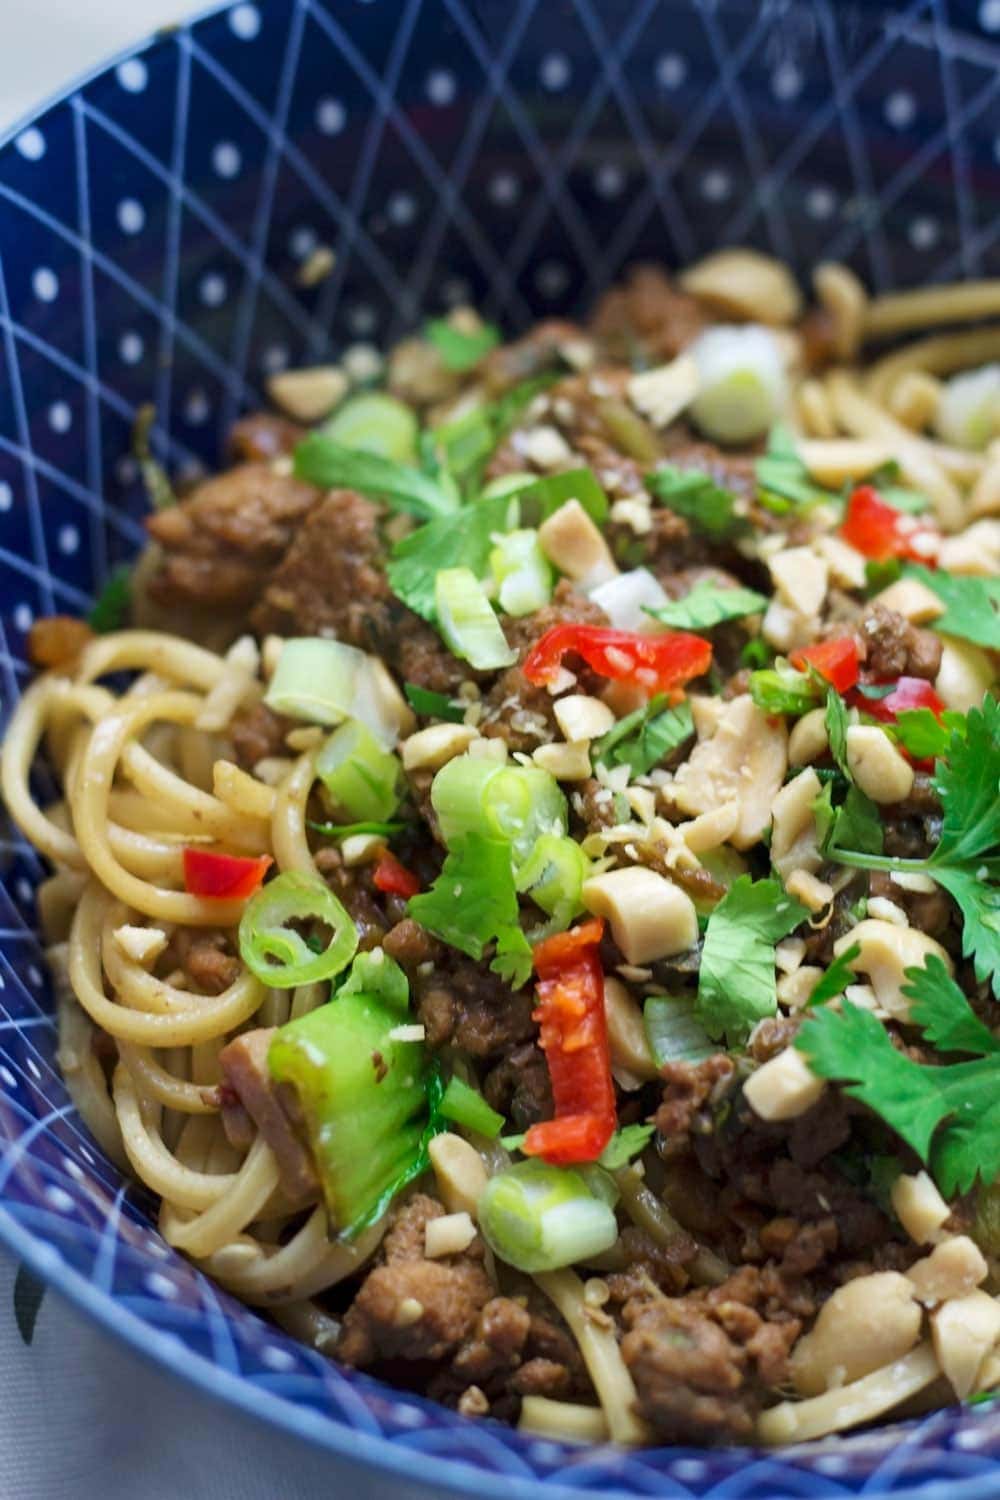 These spicy pork mince noodles are your next easy weeknight recipe! Have dinner on the table in less than half an hour and serve a meal with a kick. 